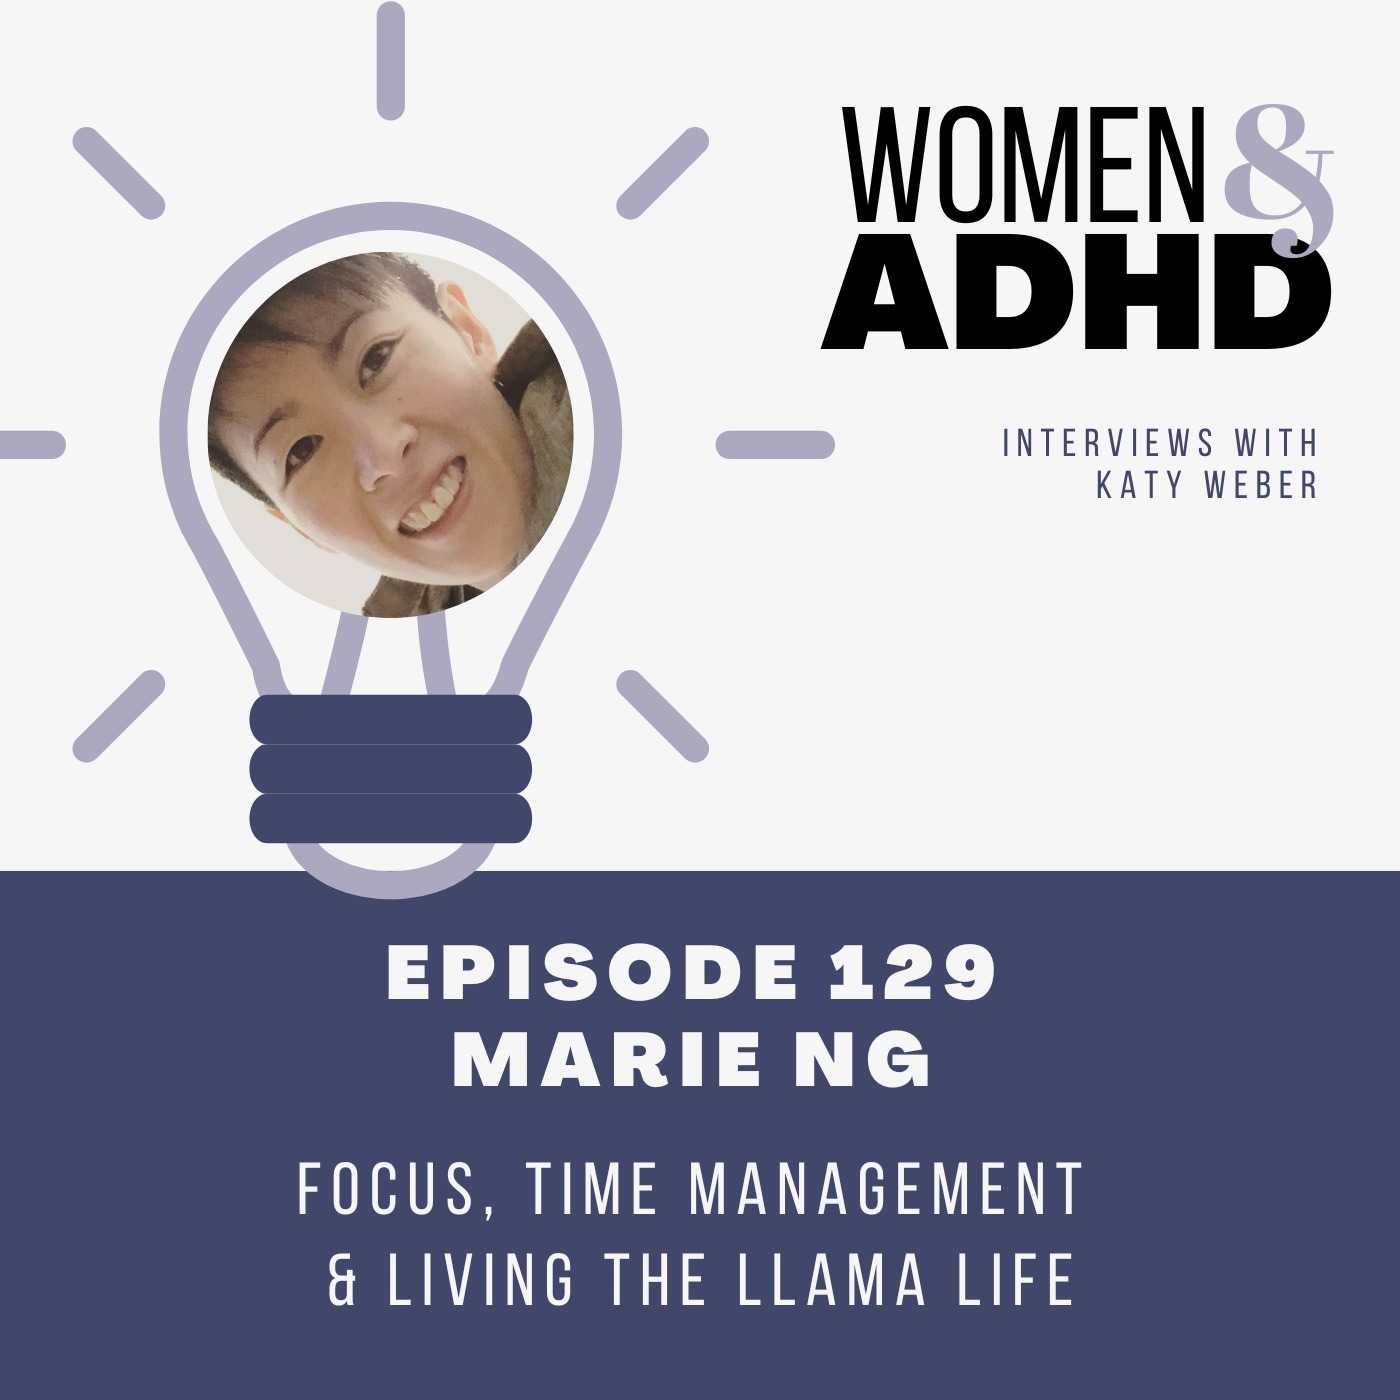 Marie Ng: Focus, time management & living the llama life